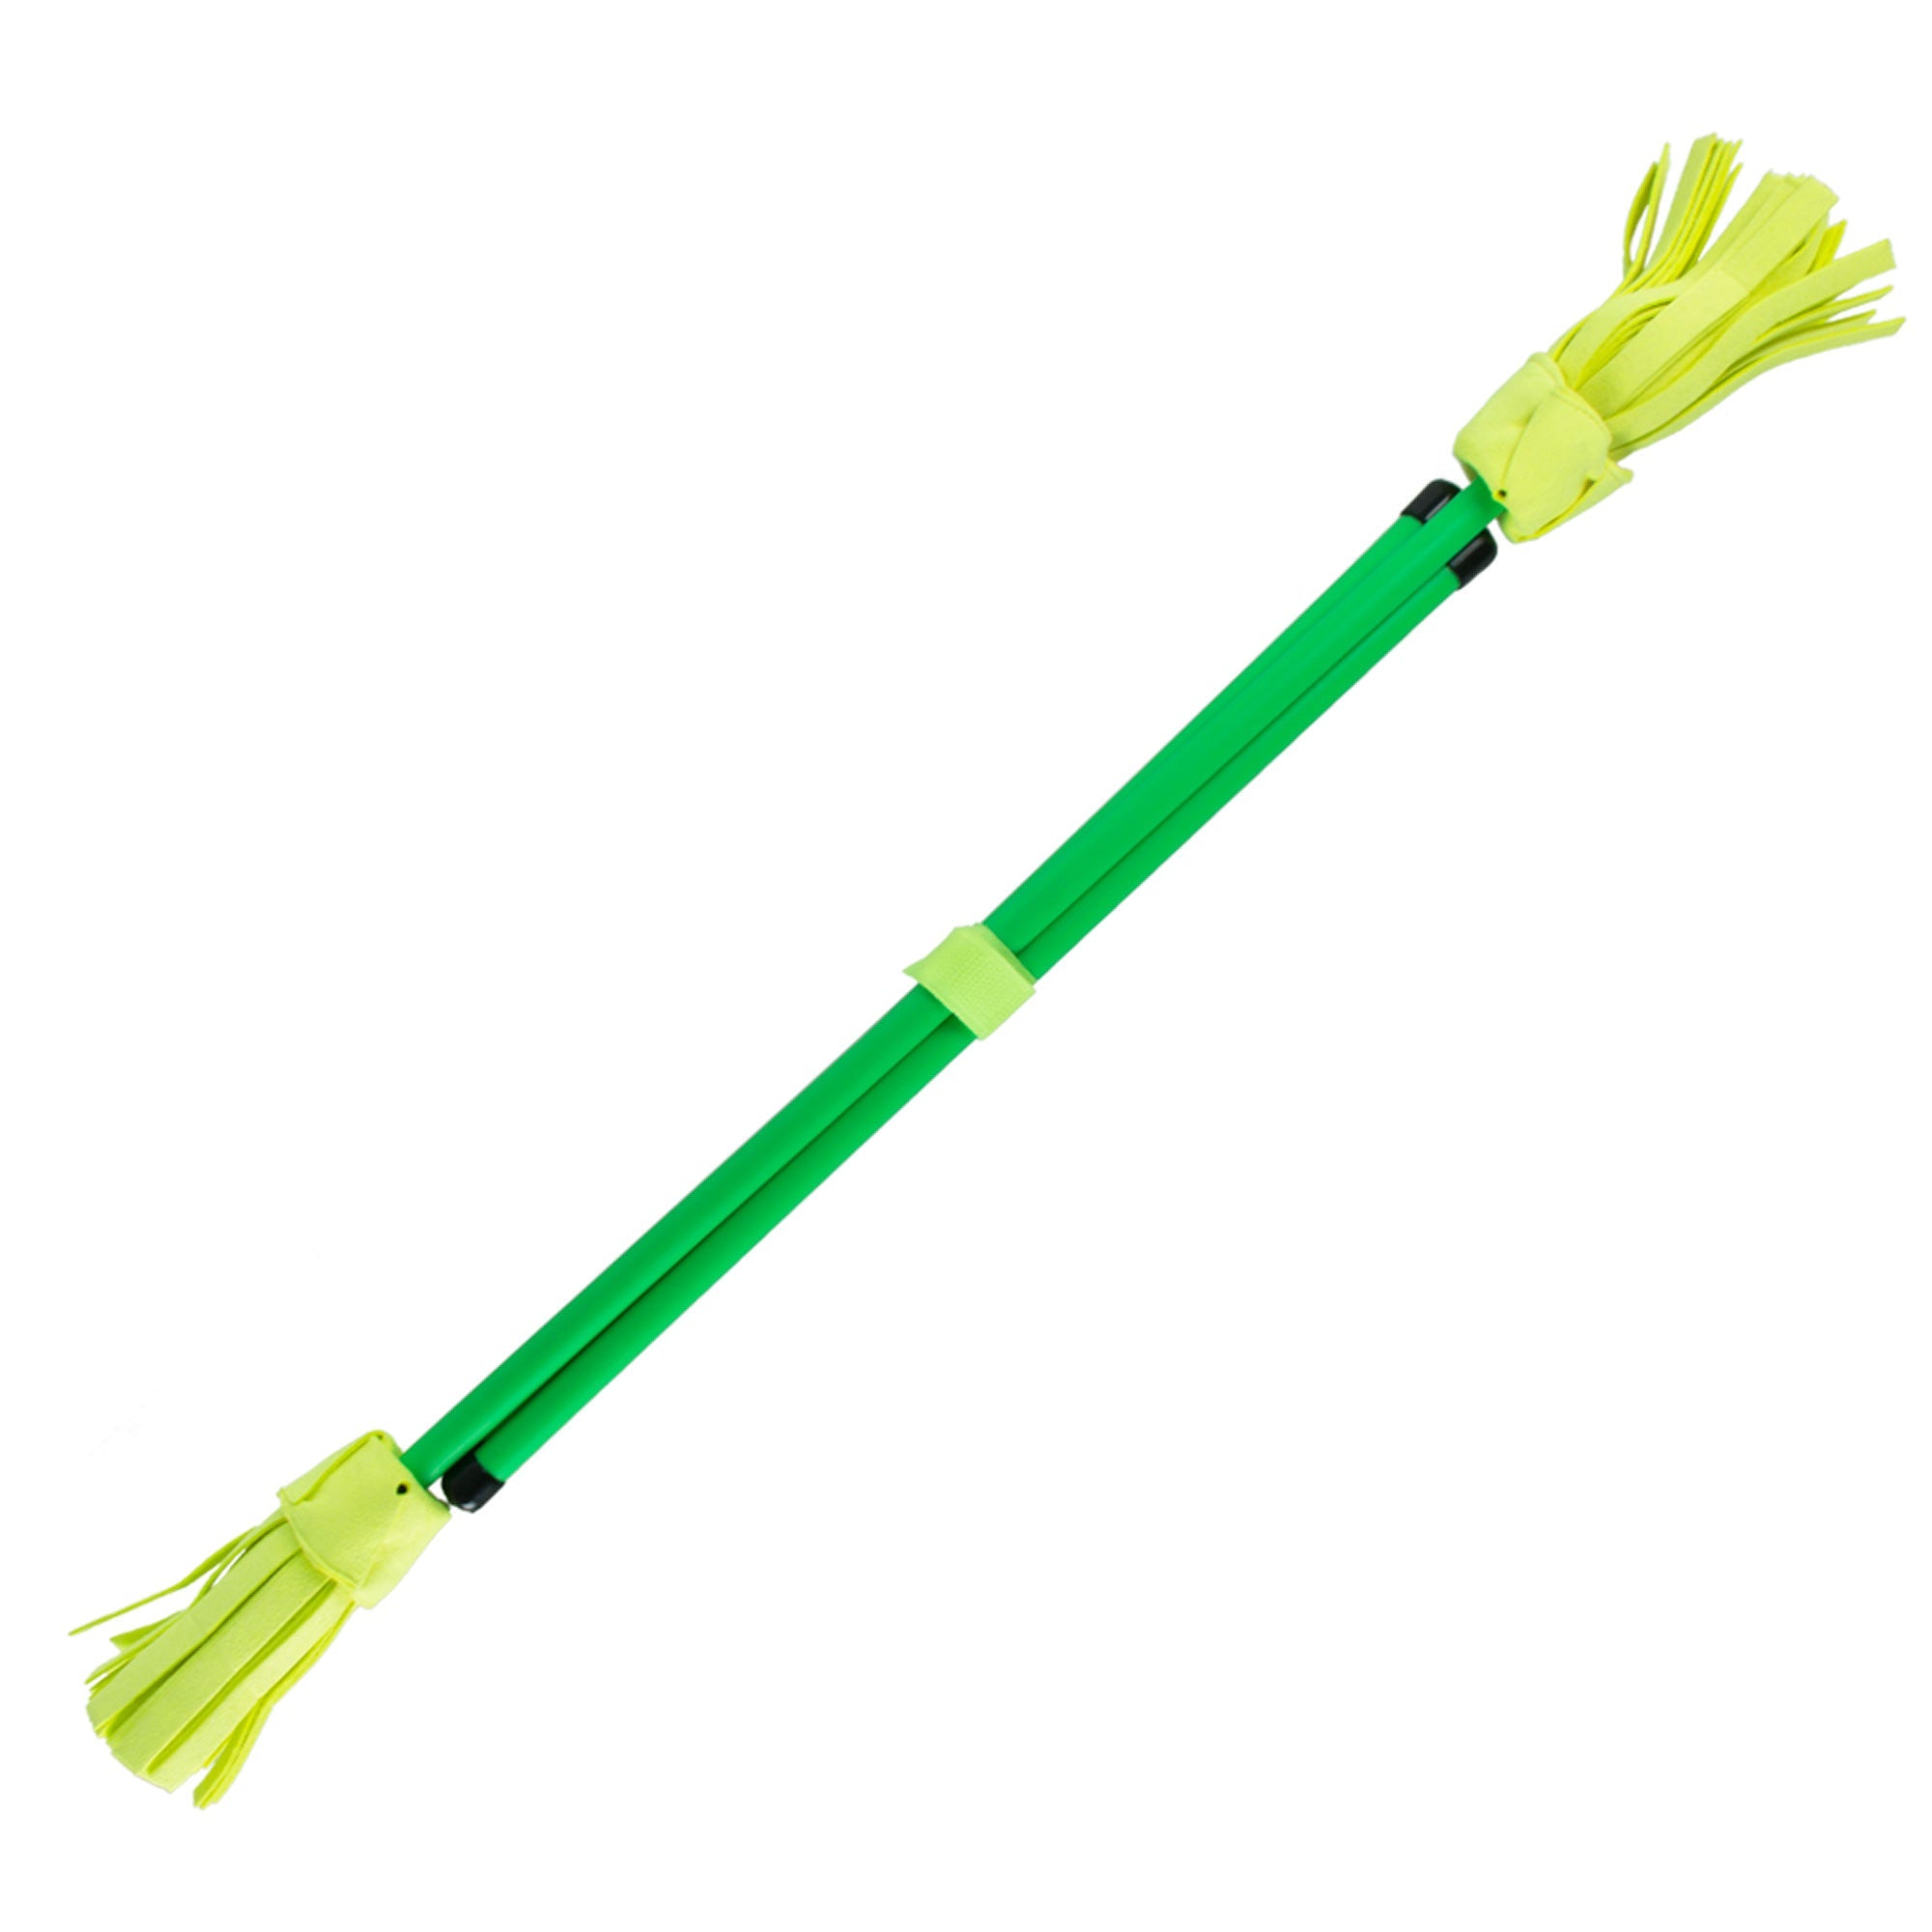 green neo flower stick and hand sticks strapped together